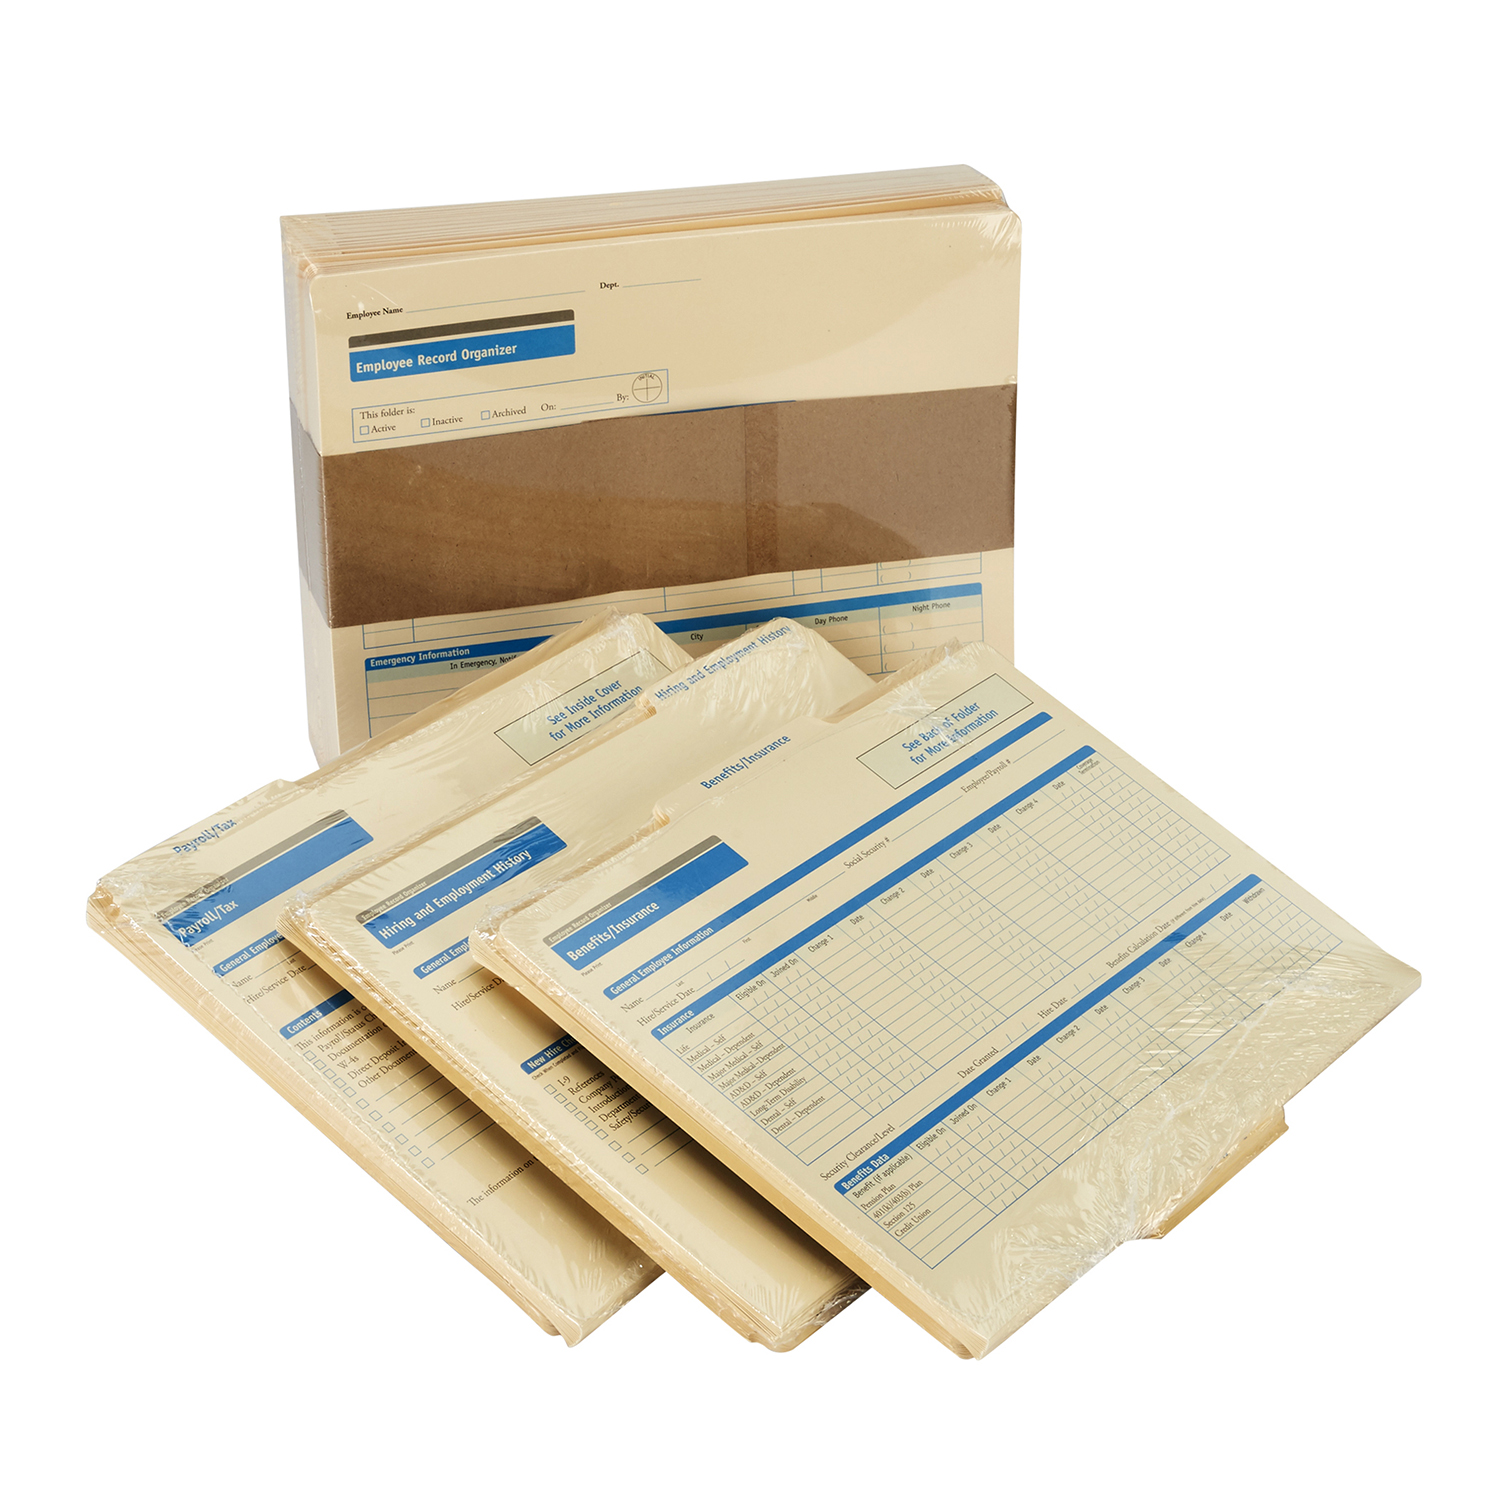 Picture of Employee Record Organizer, 3 Folder Set, 25-Pack